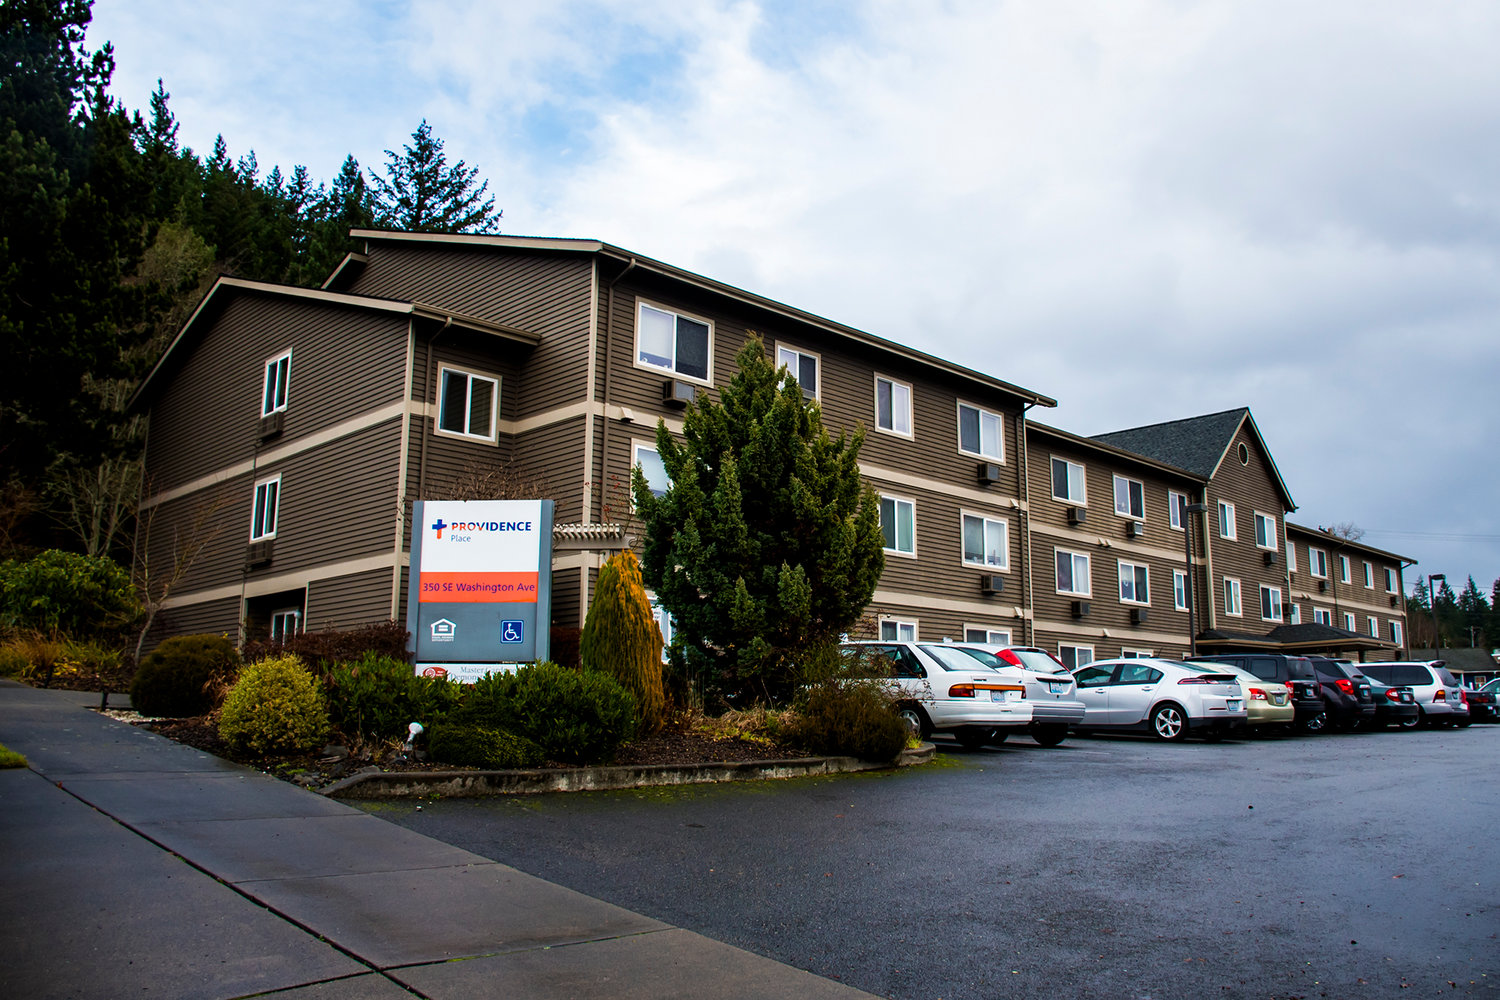 Providence Place is located at 350 SE Washington Ave. in Chehalis.